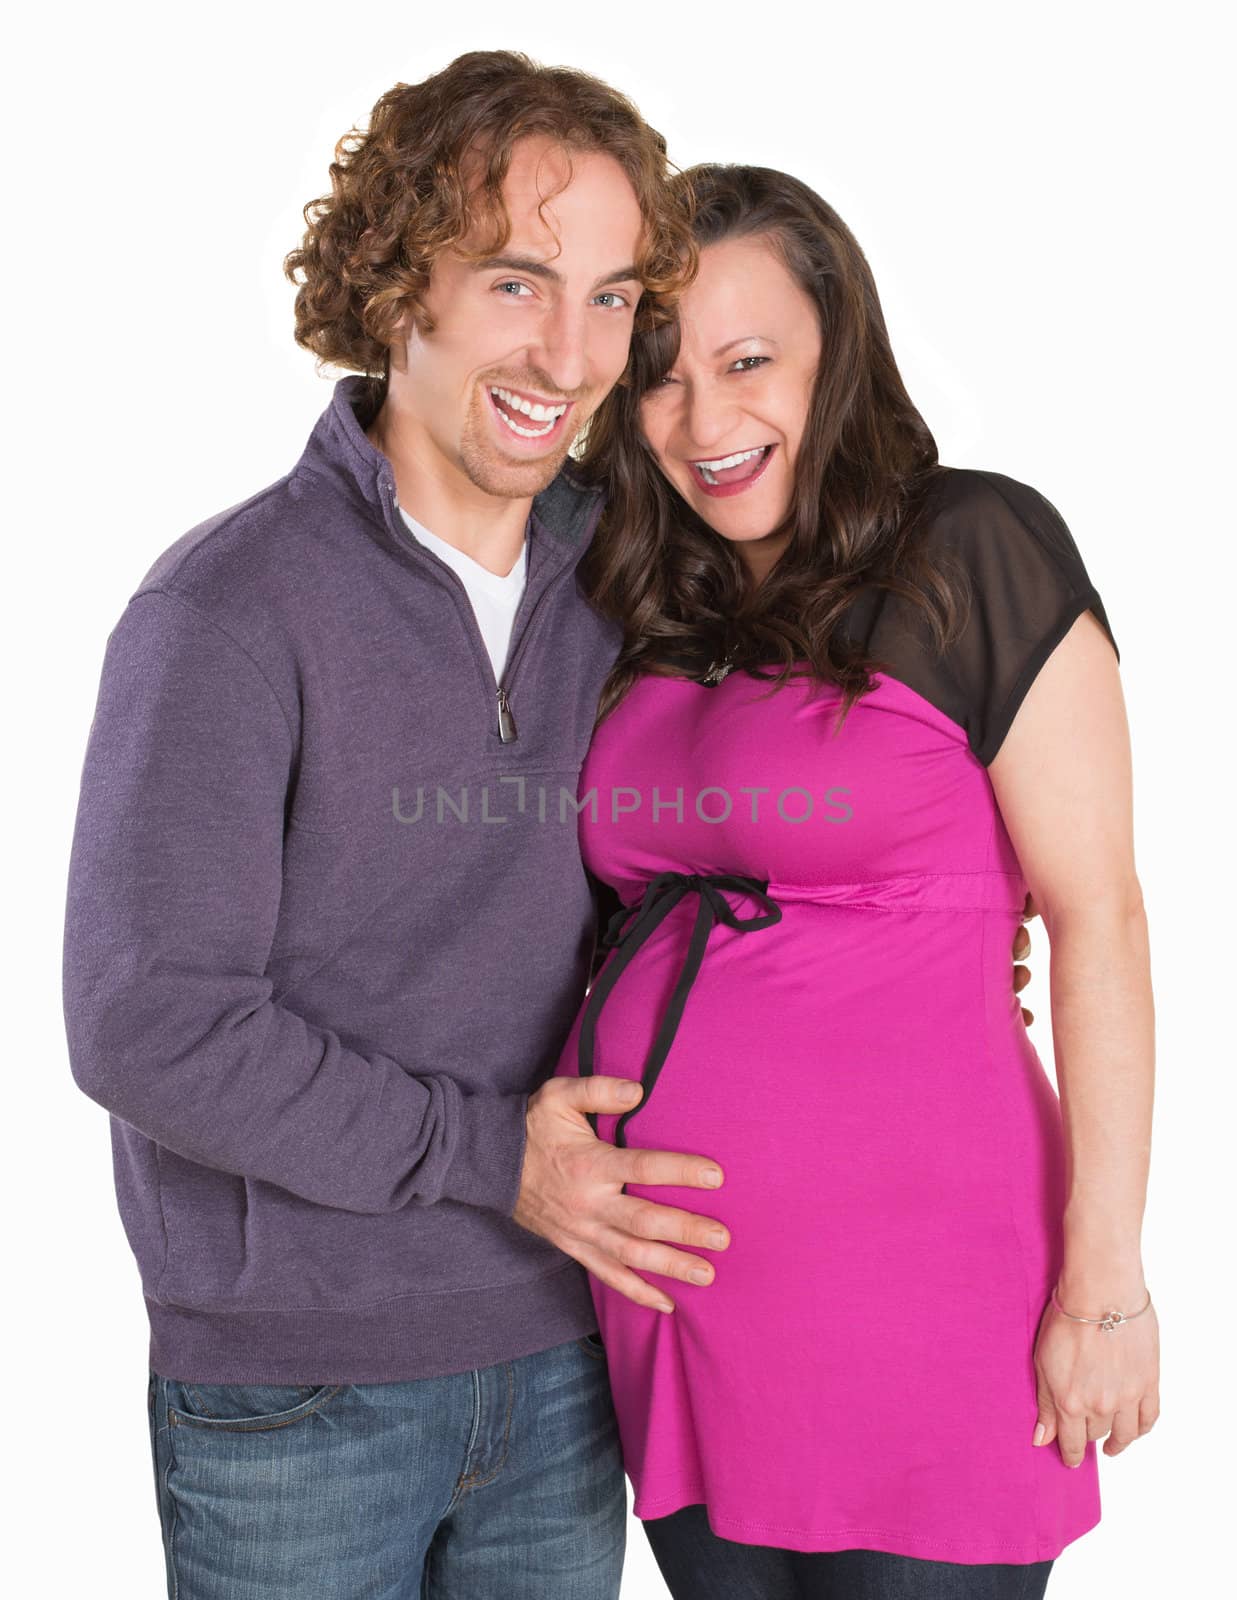 Cute laughing wife and husband expecting baby